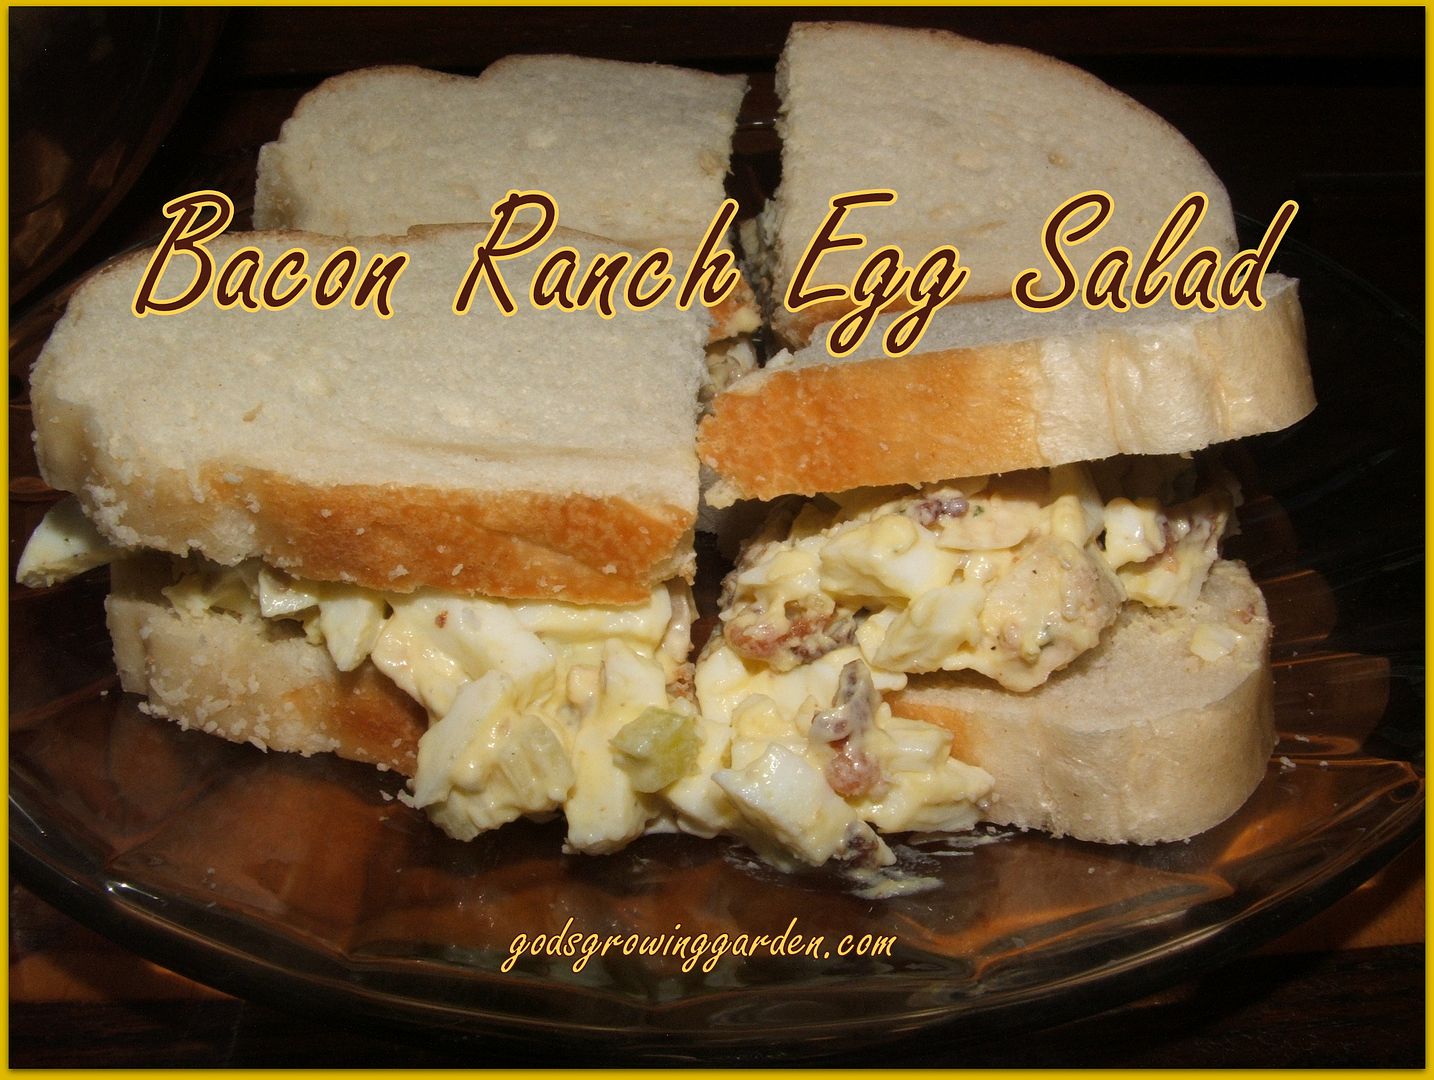 Bacon Ranch Egg Salad by Angie Ouellette-Tower for godsgrowinggarden.com photo 011_zps88345690.jpg